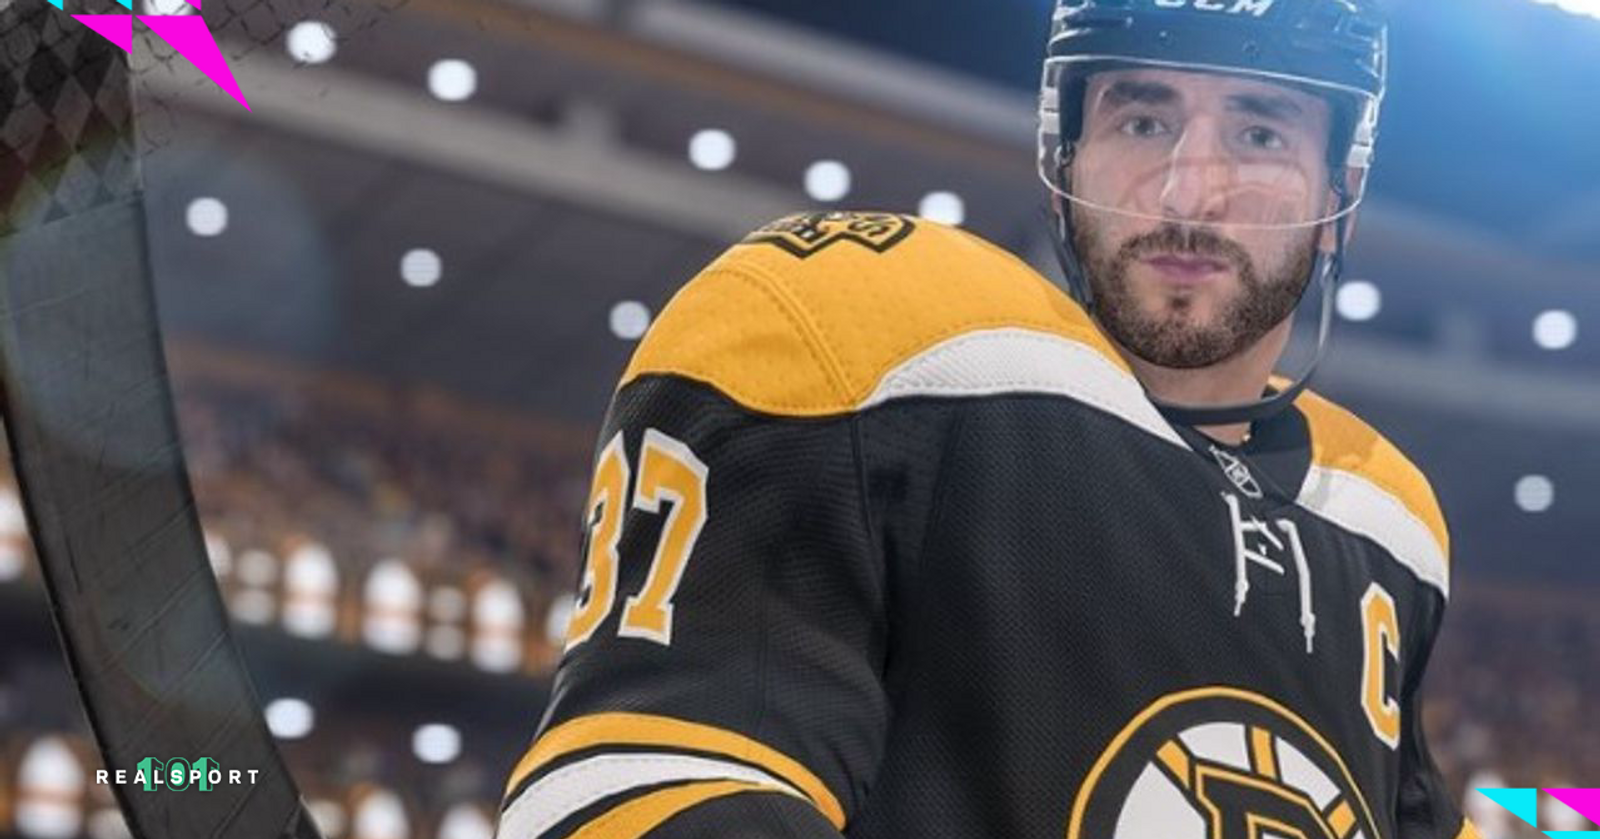 NHL 20 HUT: Team of the Week Led By Hedman - Operation Sports